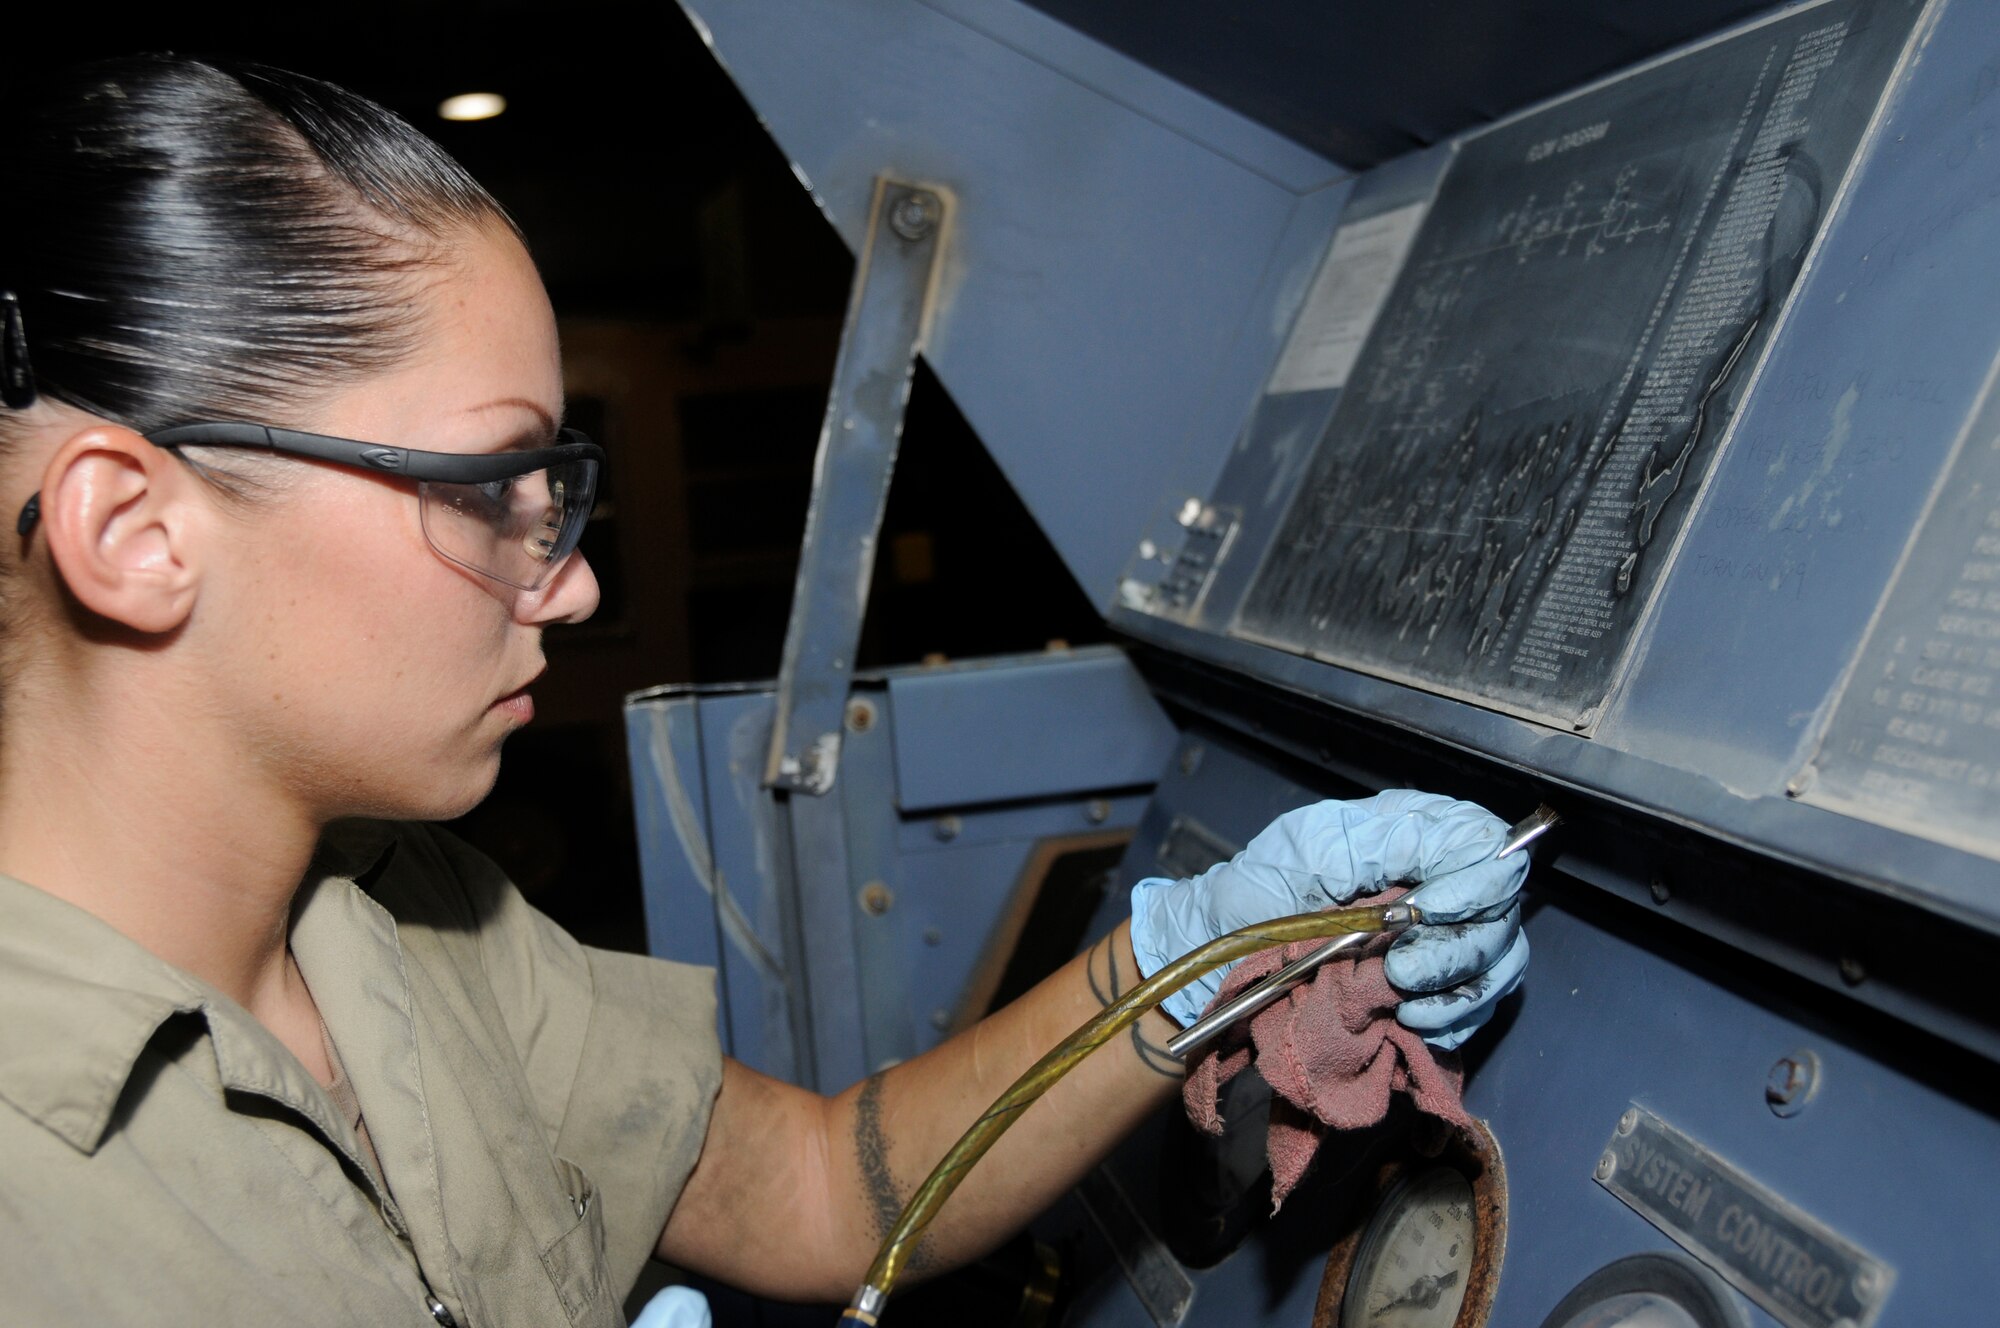 Staff Sgt. Elaina Bagnato, aerospace ground equipment maintainer assigned to the 379th Expeditionary Maintenance Squadron, applies lubricant to a liquid nitrogen cart Aug. 23, 2008, at an undisclosed air base in Southwest Asia. Sergeant Bagneto is responsible for maintaining equipment required to support Air Force aircraft while on the tarmac. Sergeant Bagneto, a native of Ventura, Calif., is deployed from Grand Forks Air Force Base, N.D., in support of Operations Iraqi Freedom, Enduring Freedom and Joint Task Force-Horn of Africa. (U.S. Air Force photo by Staff Sgt. Darnell T. Cannady/Released)